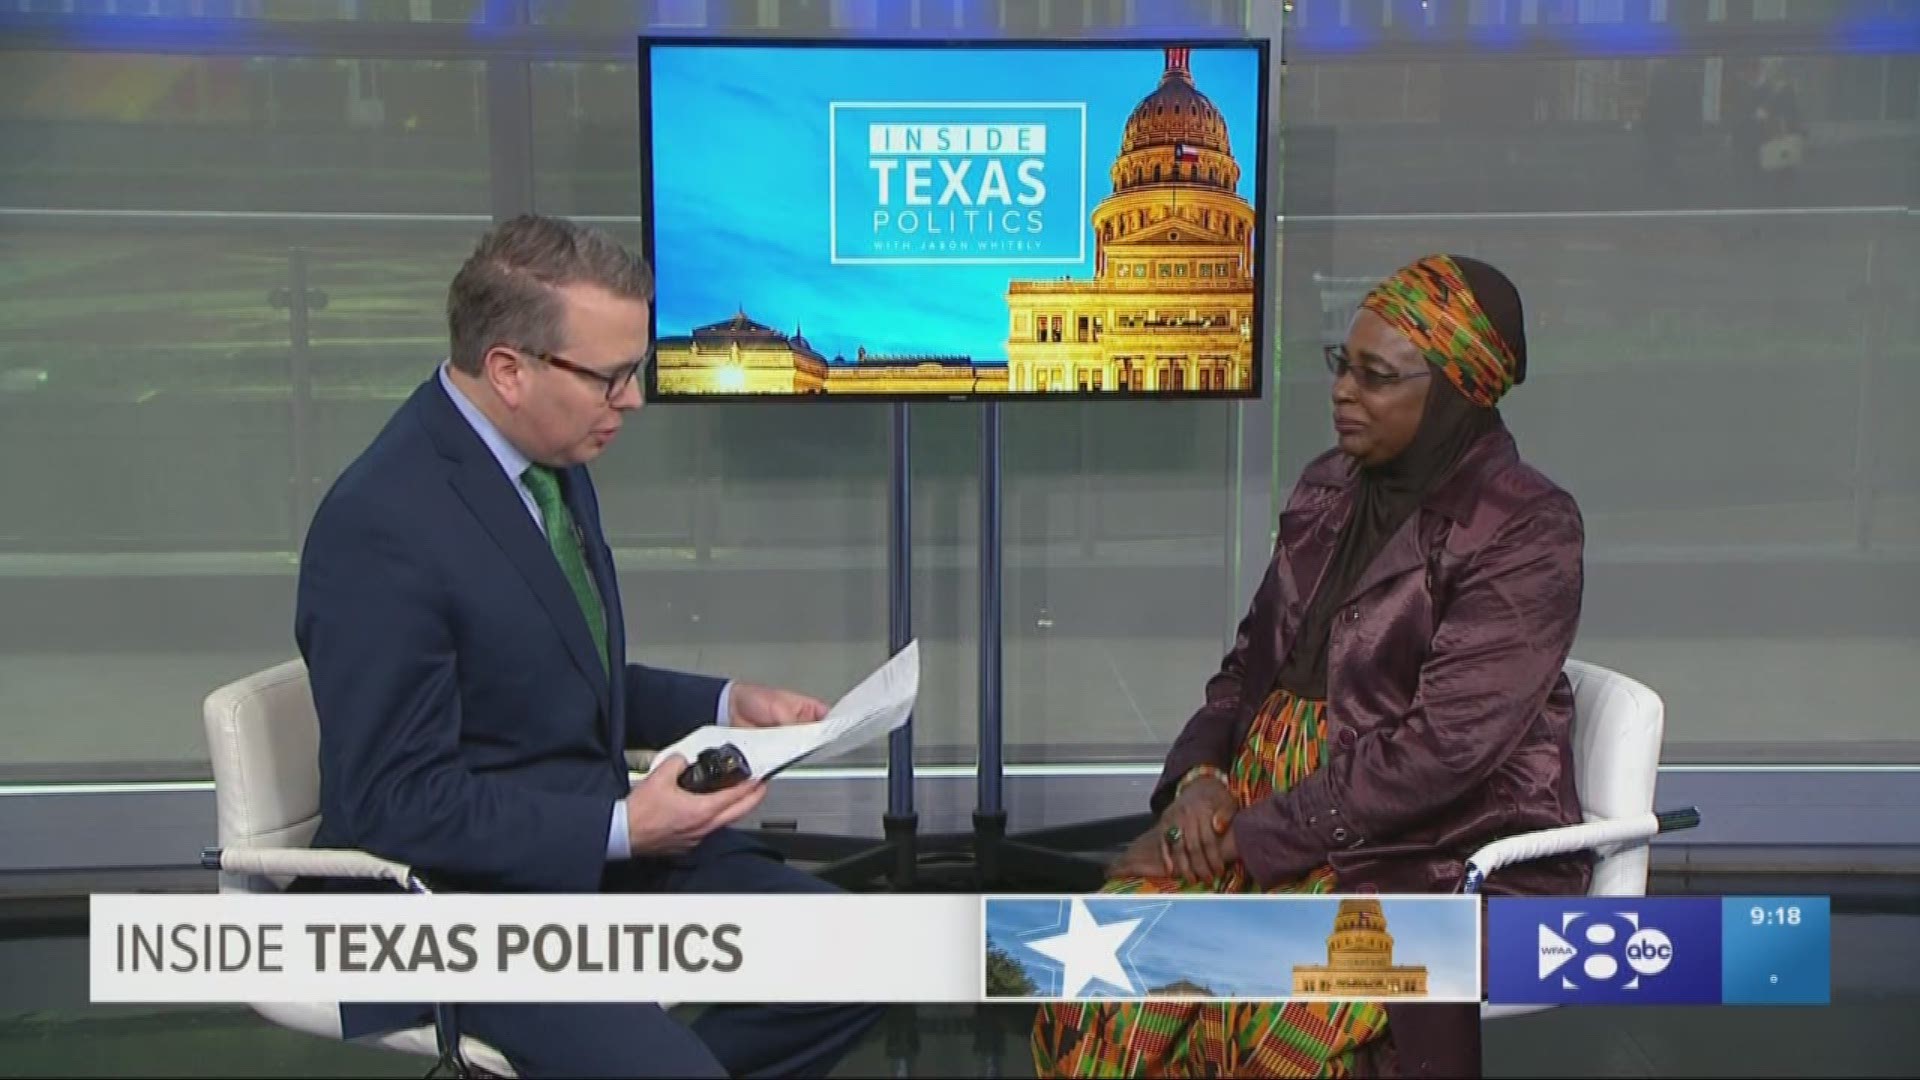 Deanna Moton is leading an effort to get more black voters to the polls this November. She is a civil and voter rights activist with a rich history of activism.